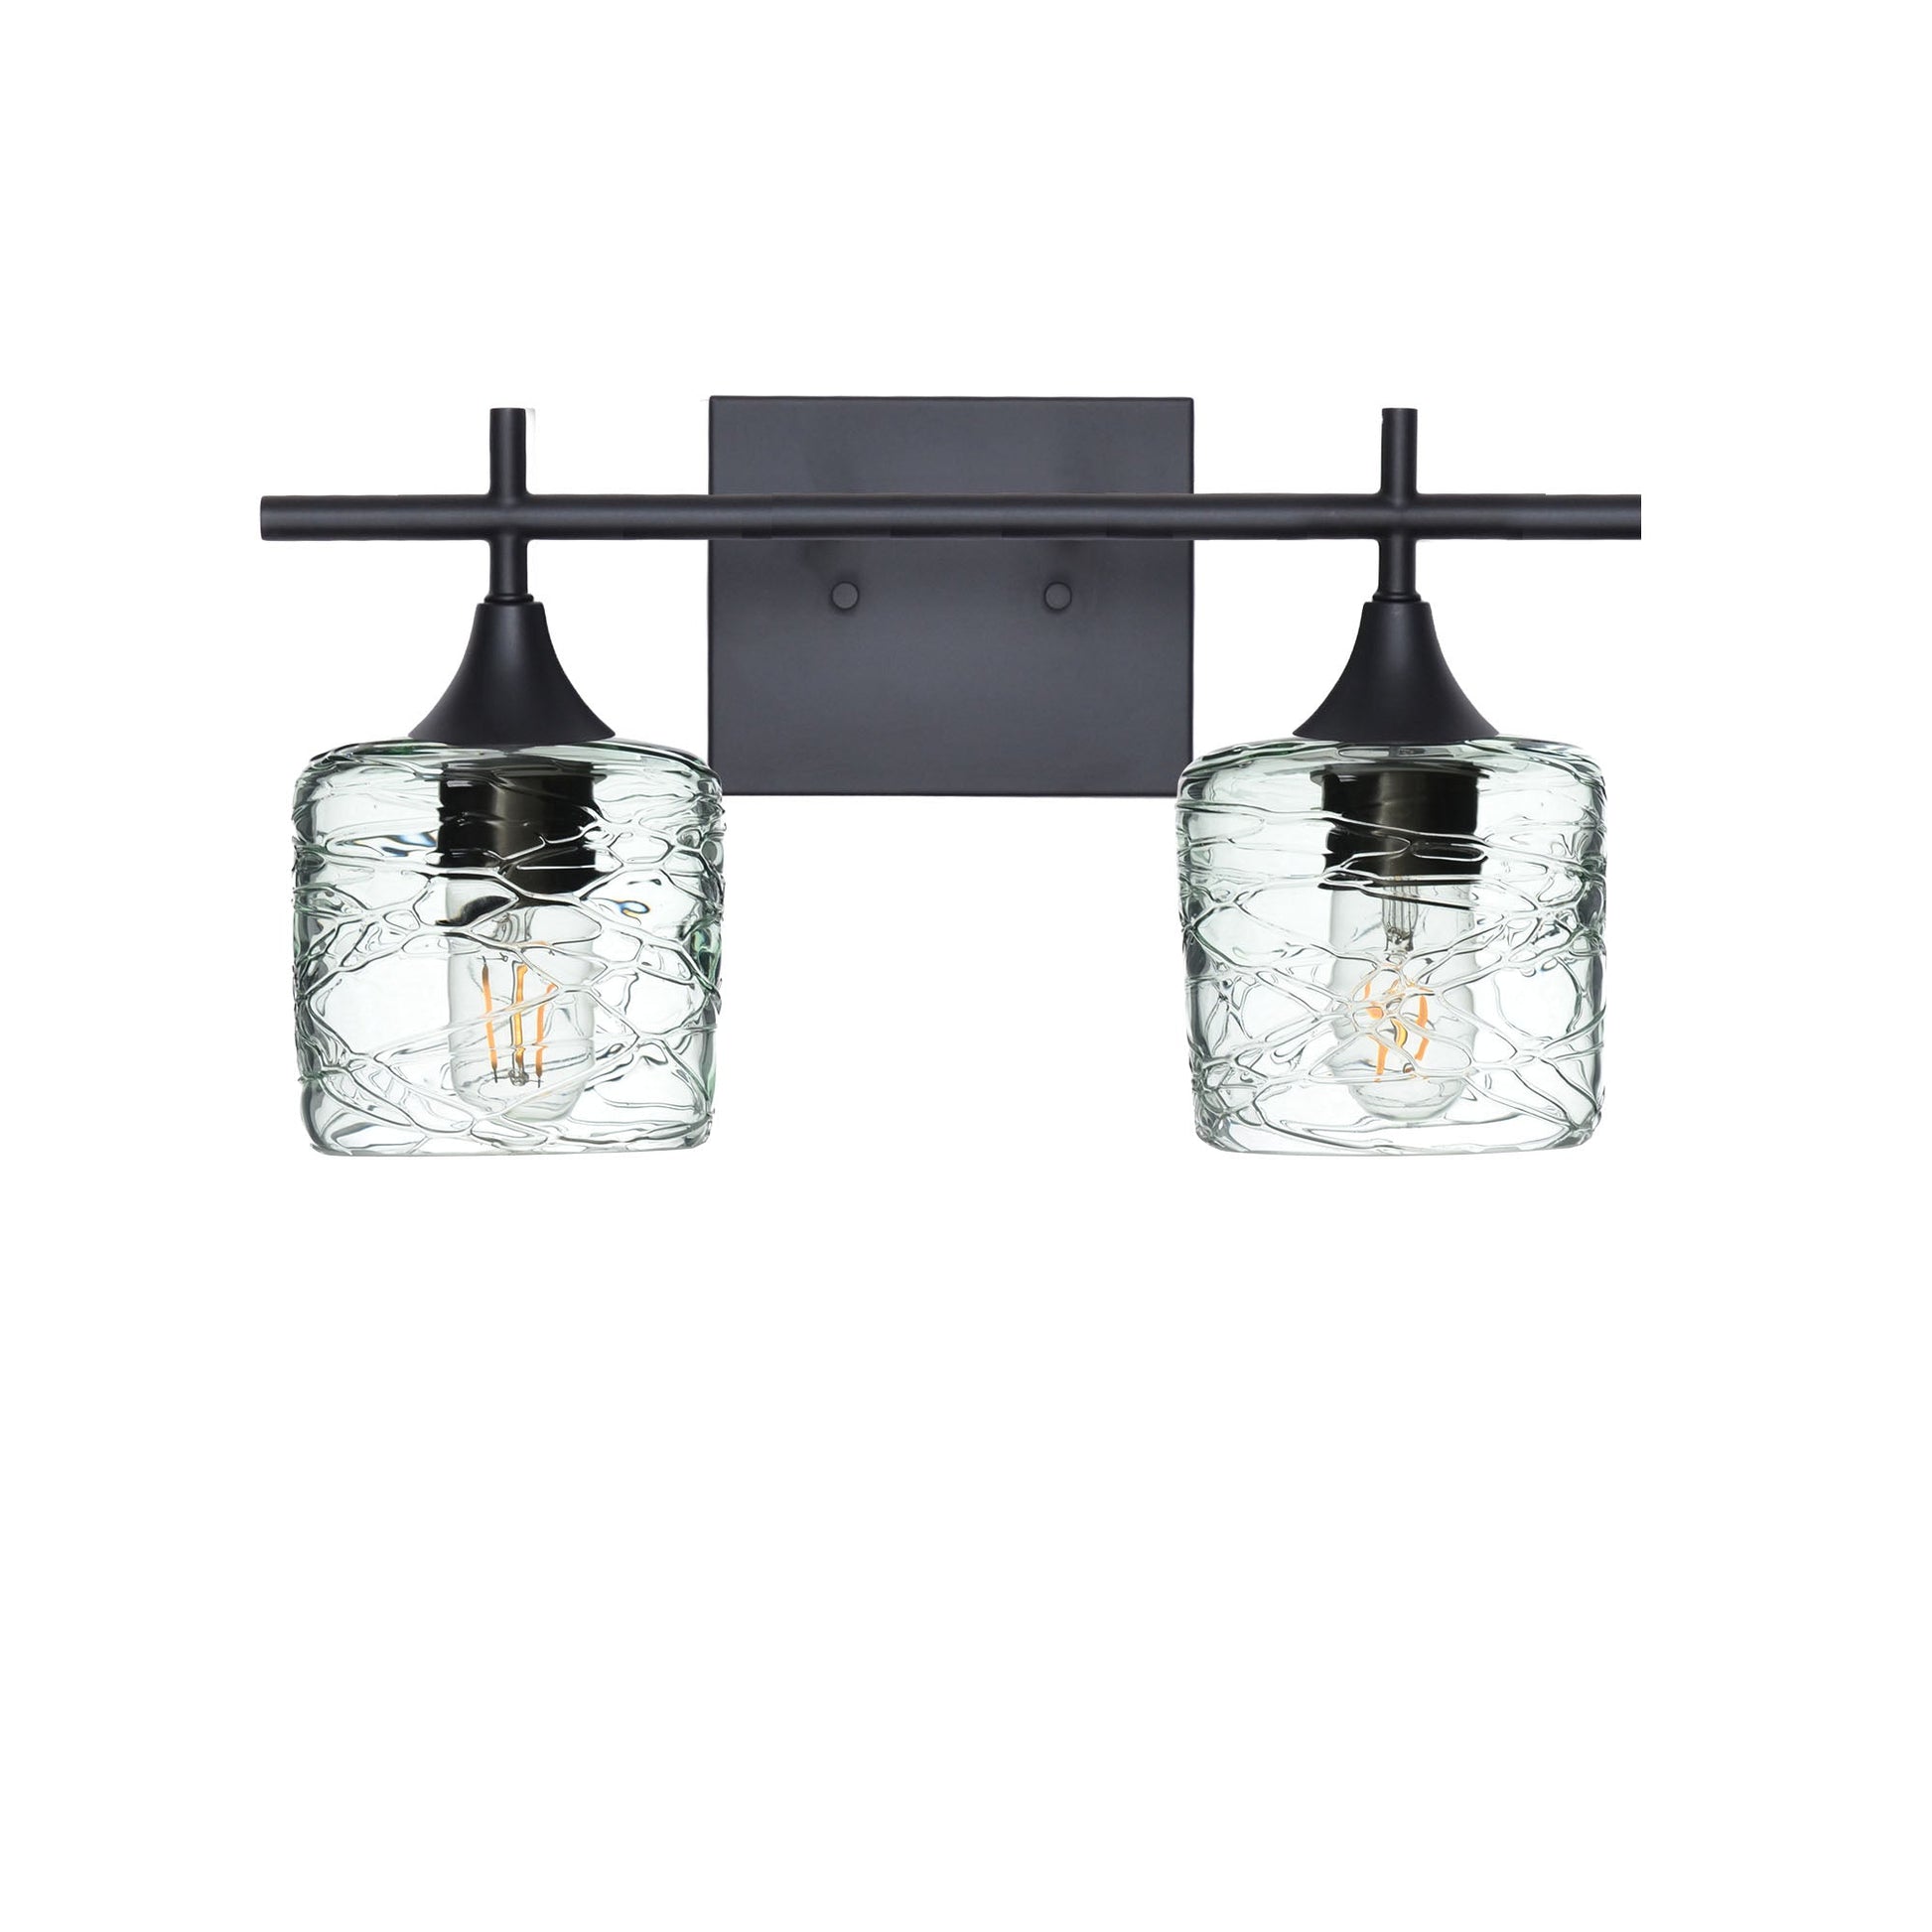 601 Spun: 2 Light Wall Vanity-Glass-Bicycle Glass Co - Hotshop-Eco Clear-Matte Black-Bicycle Glass Co